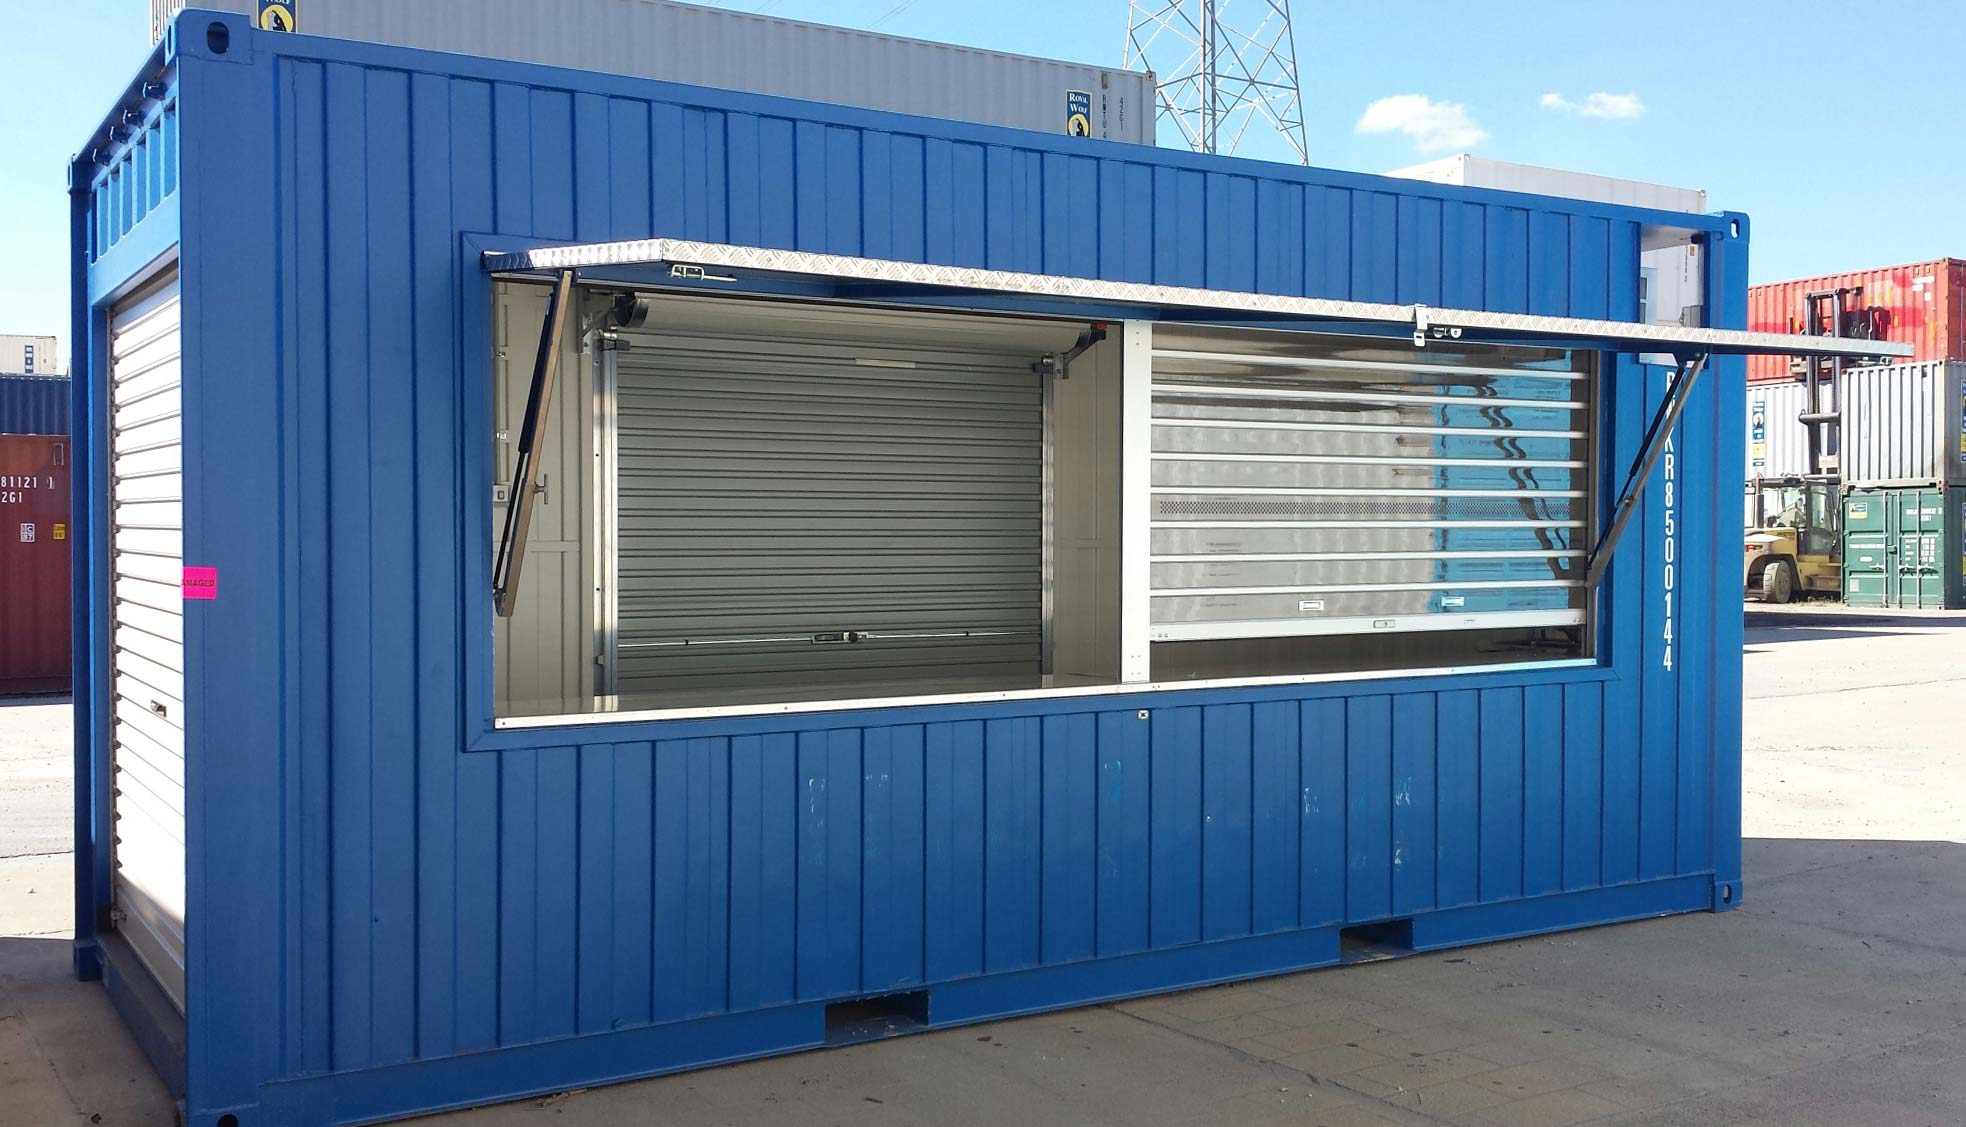 Shipping Container Doors And Windows Roll Up And Awnings Interport